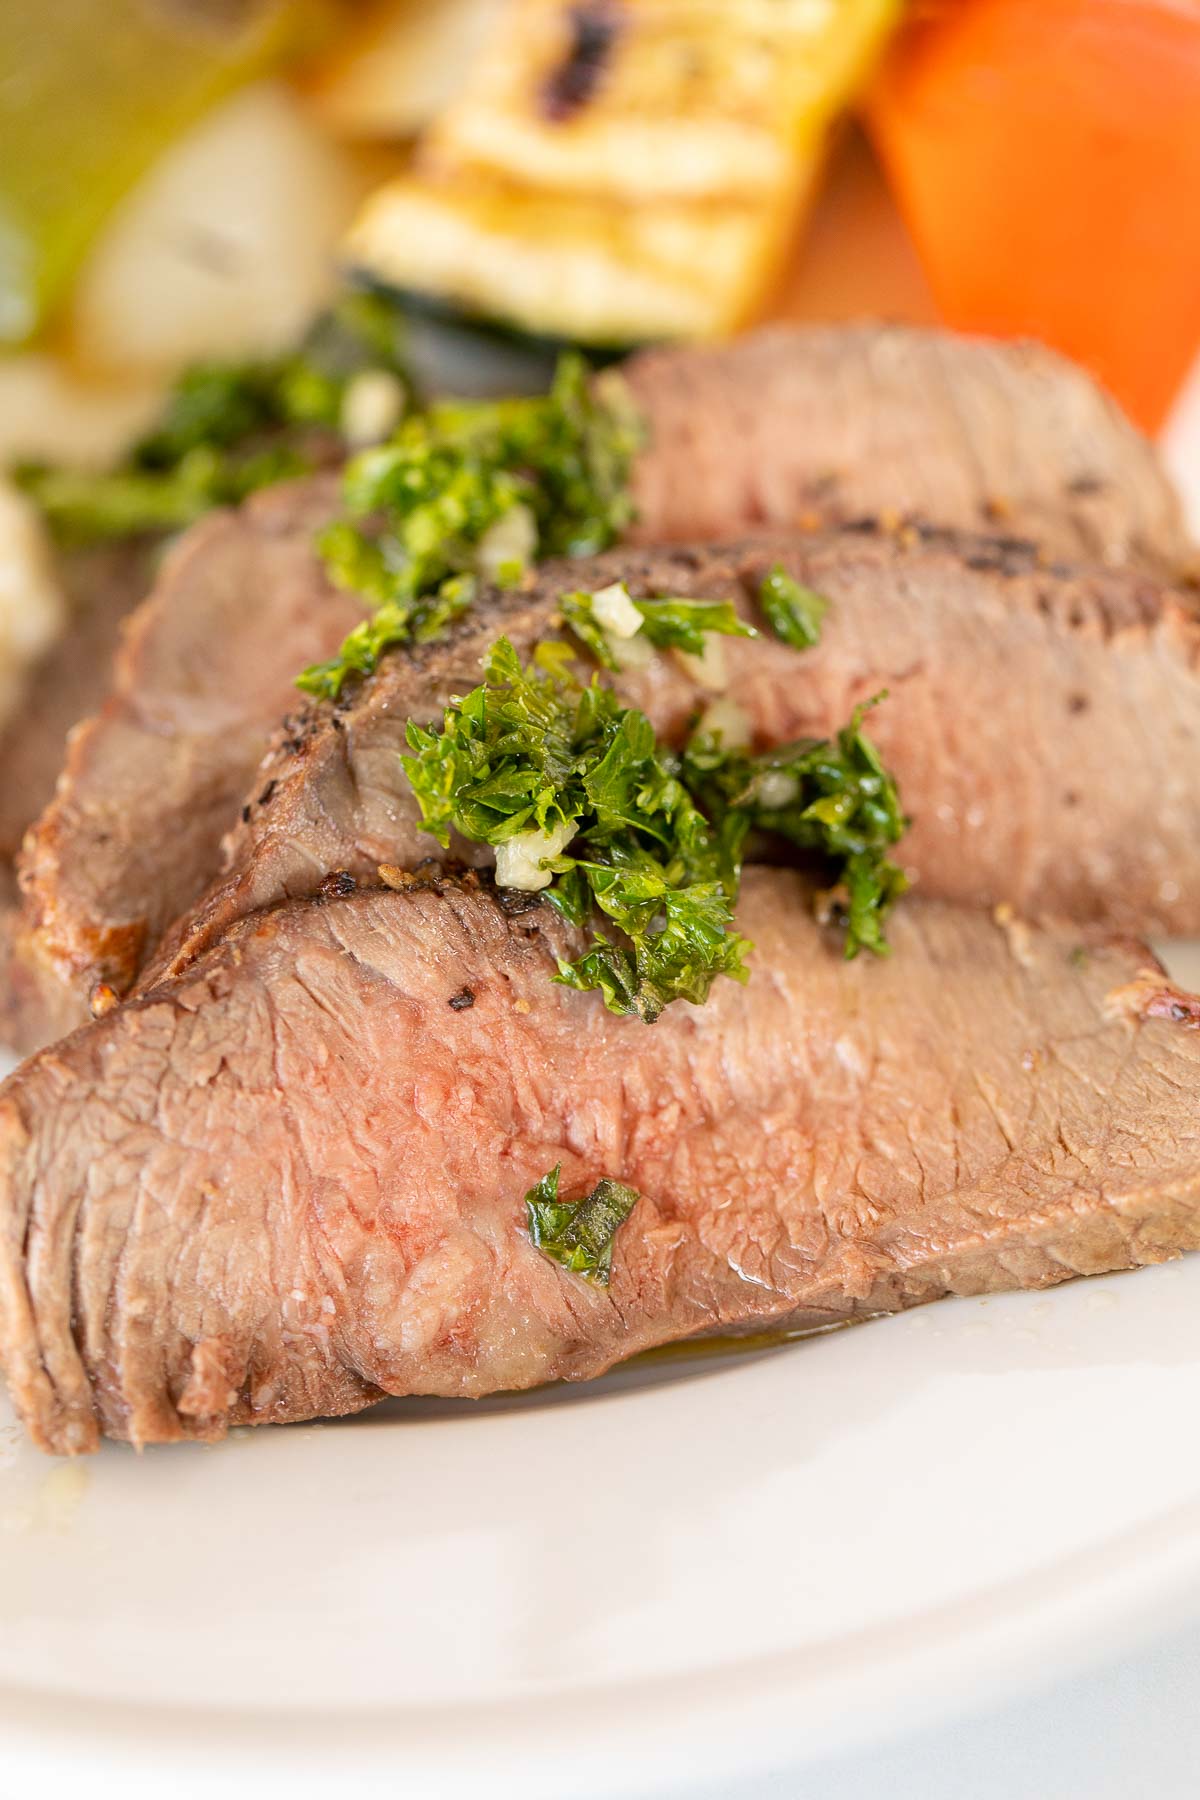 Sliced steak on a white plate, topped with chimichurri.